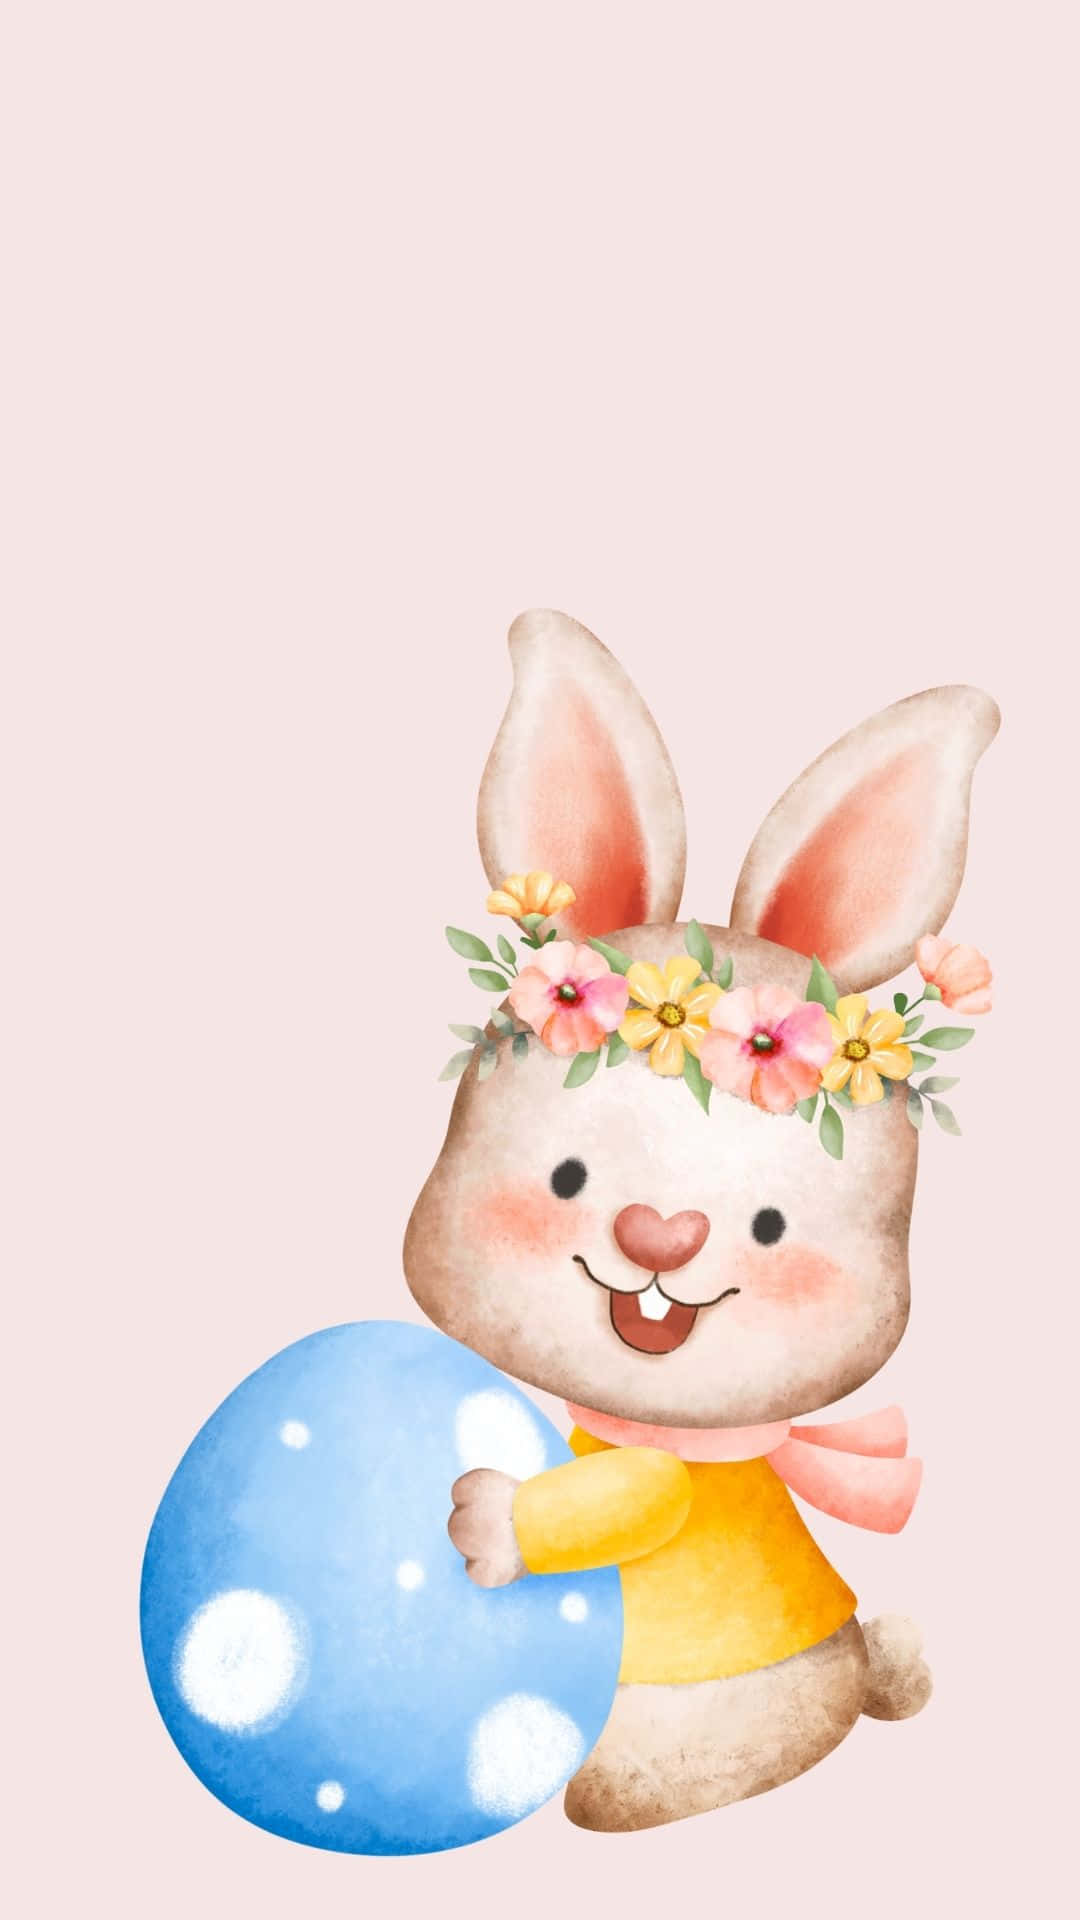 Celebrate Easter with a Colorful Easter Egg Wallpaper